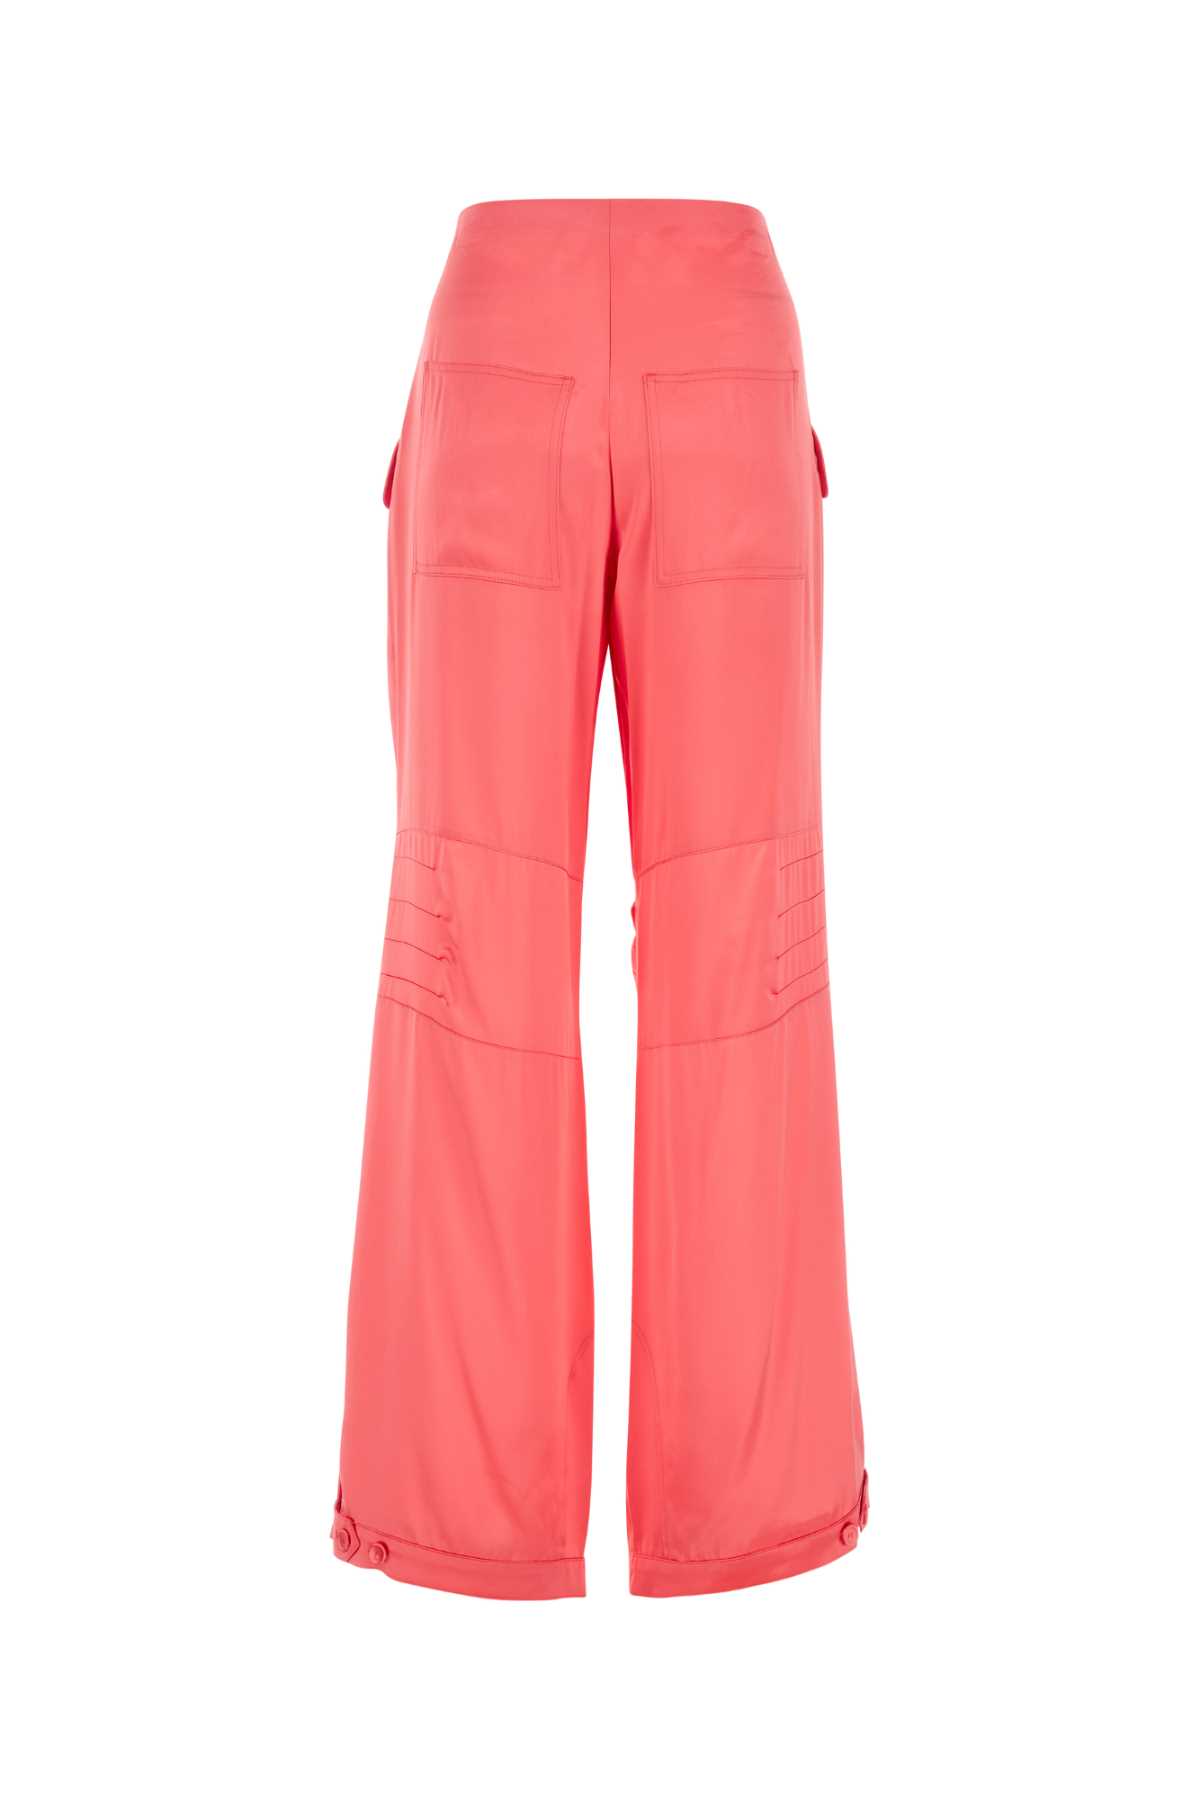 Fendi Fluo Pink Satin Cargo Pant In Kissed